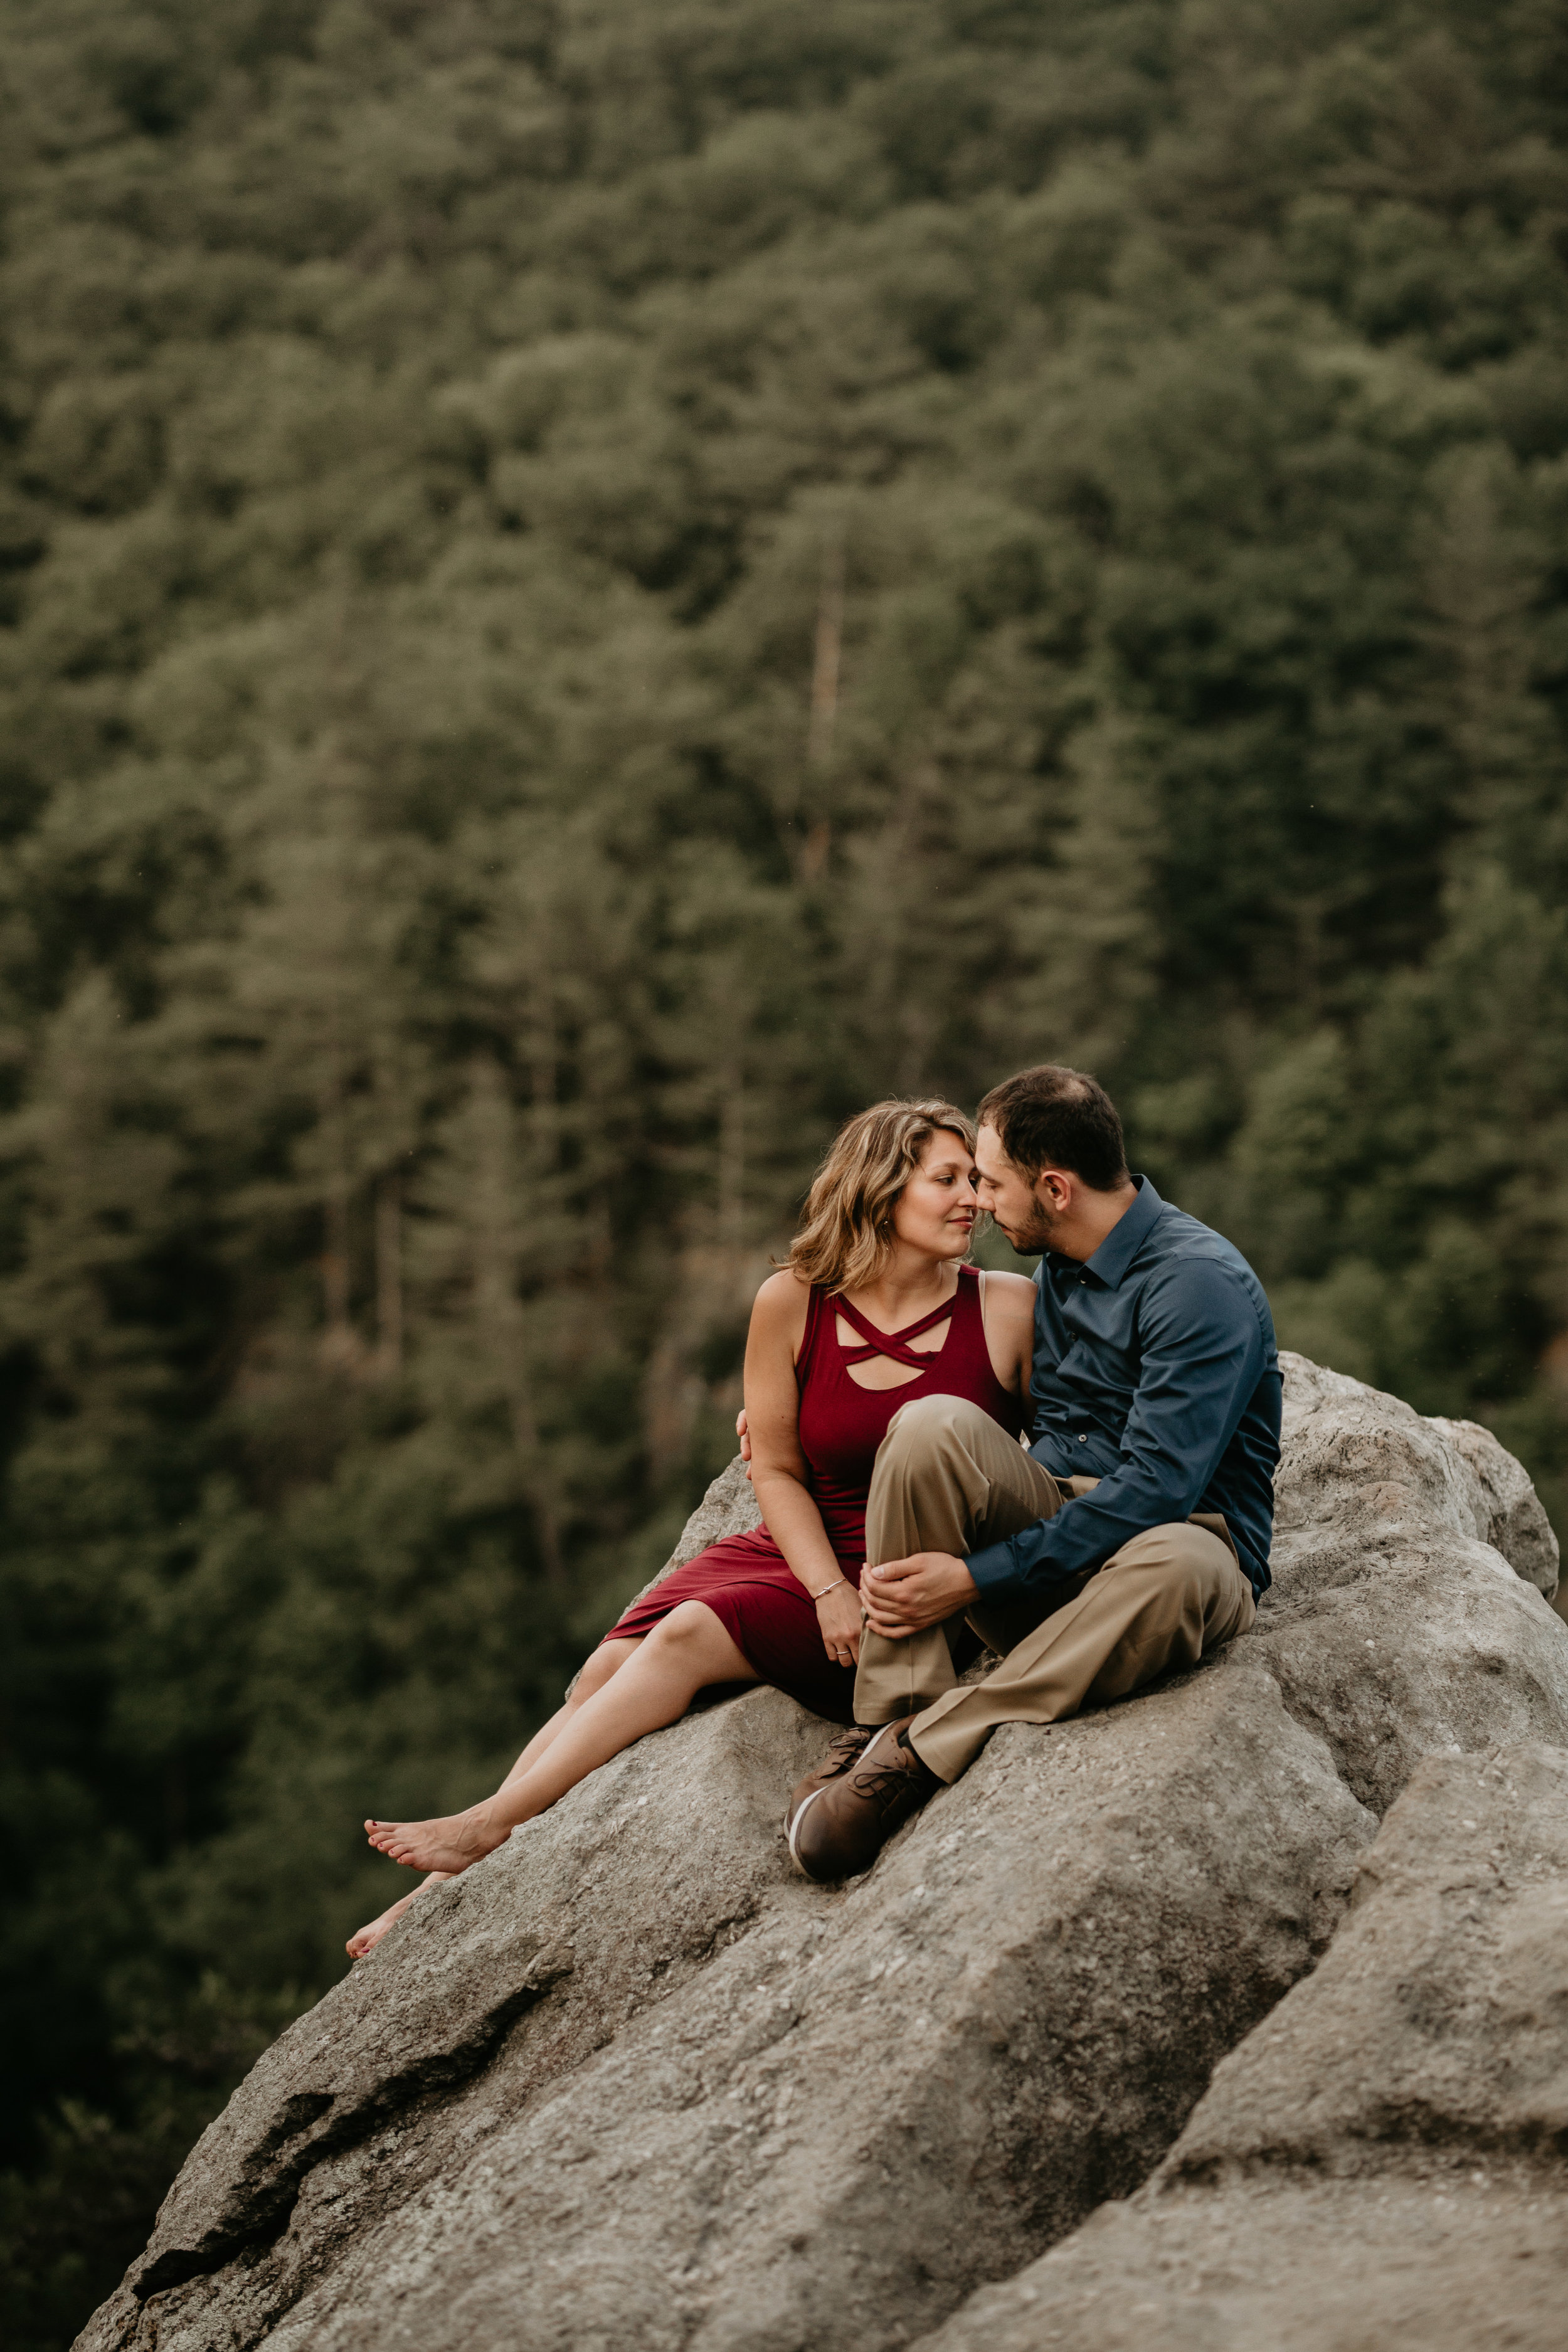 Nicole-Daacke-Photography-rock-state-park-overlook-king-queen-seat-maryland-hiking-adventure-engagement-session-photos-portraits-summer-bel-air-dog-engagement-session-34.jpg